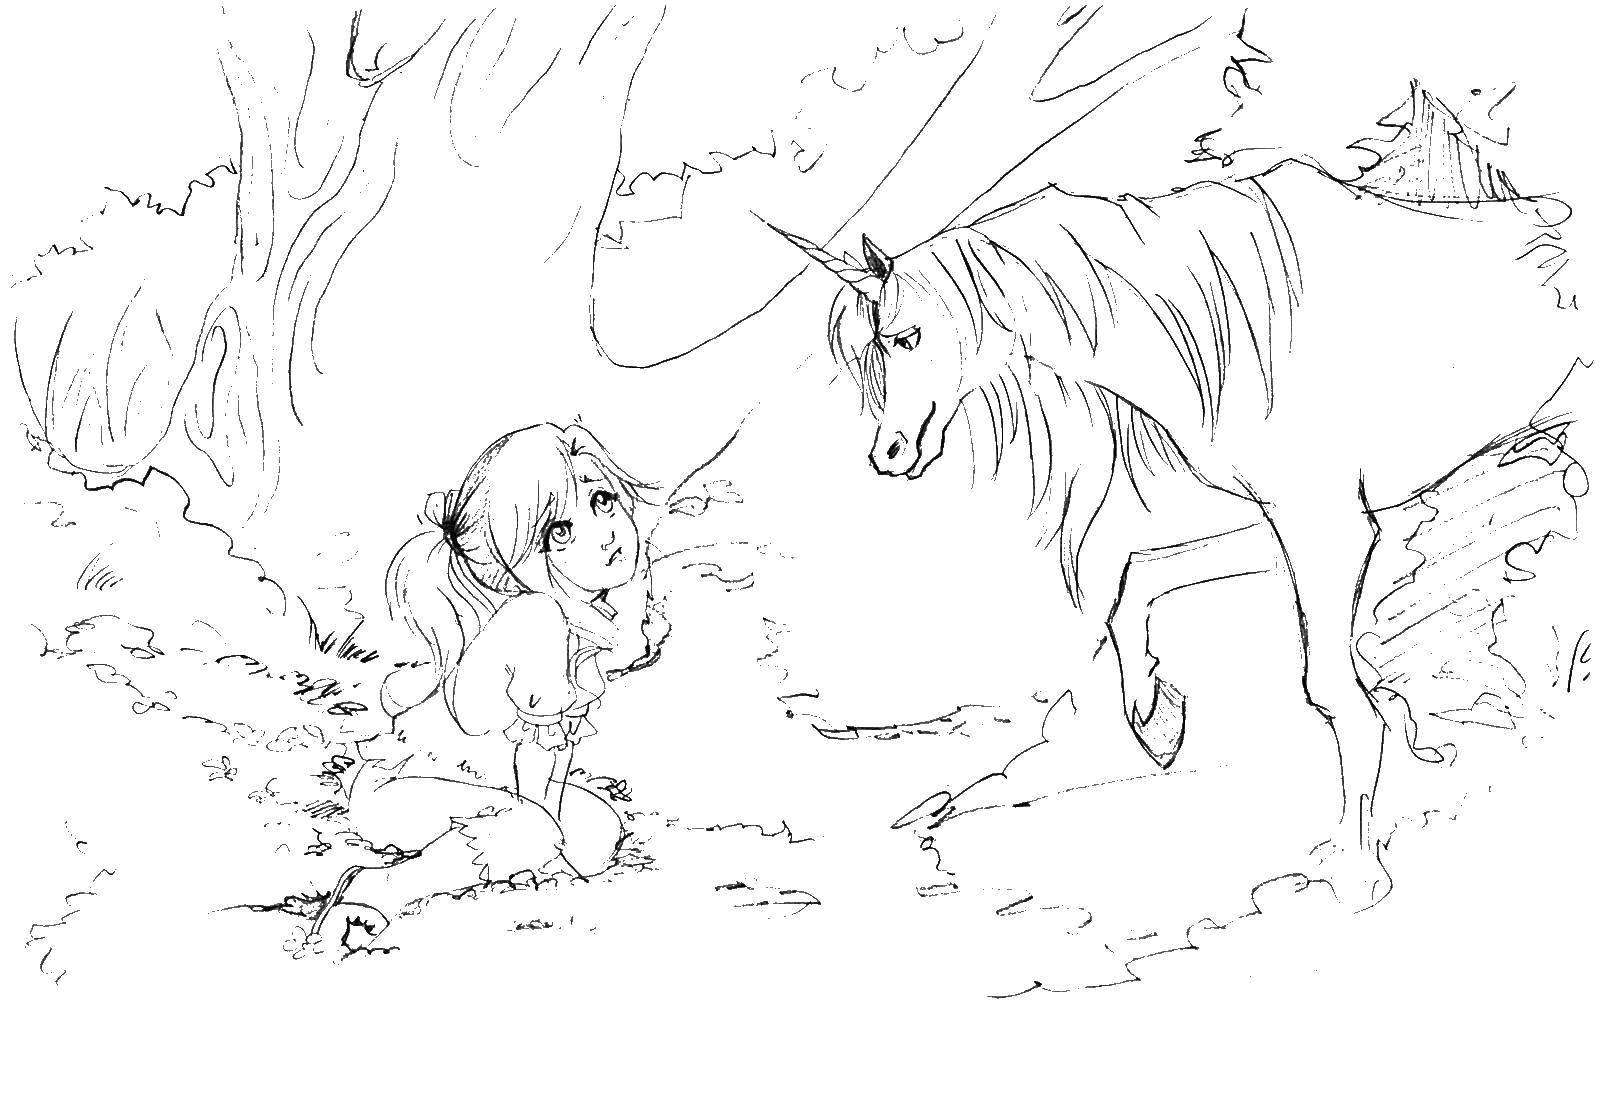 Coloring Girl and horse. Category Animals. Tags:  animals, horse, girl.